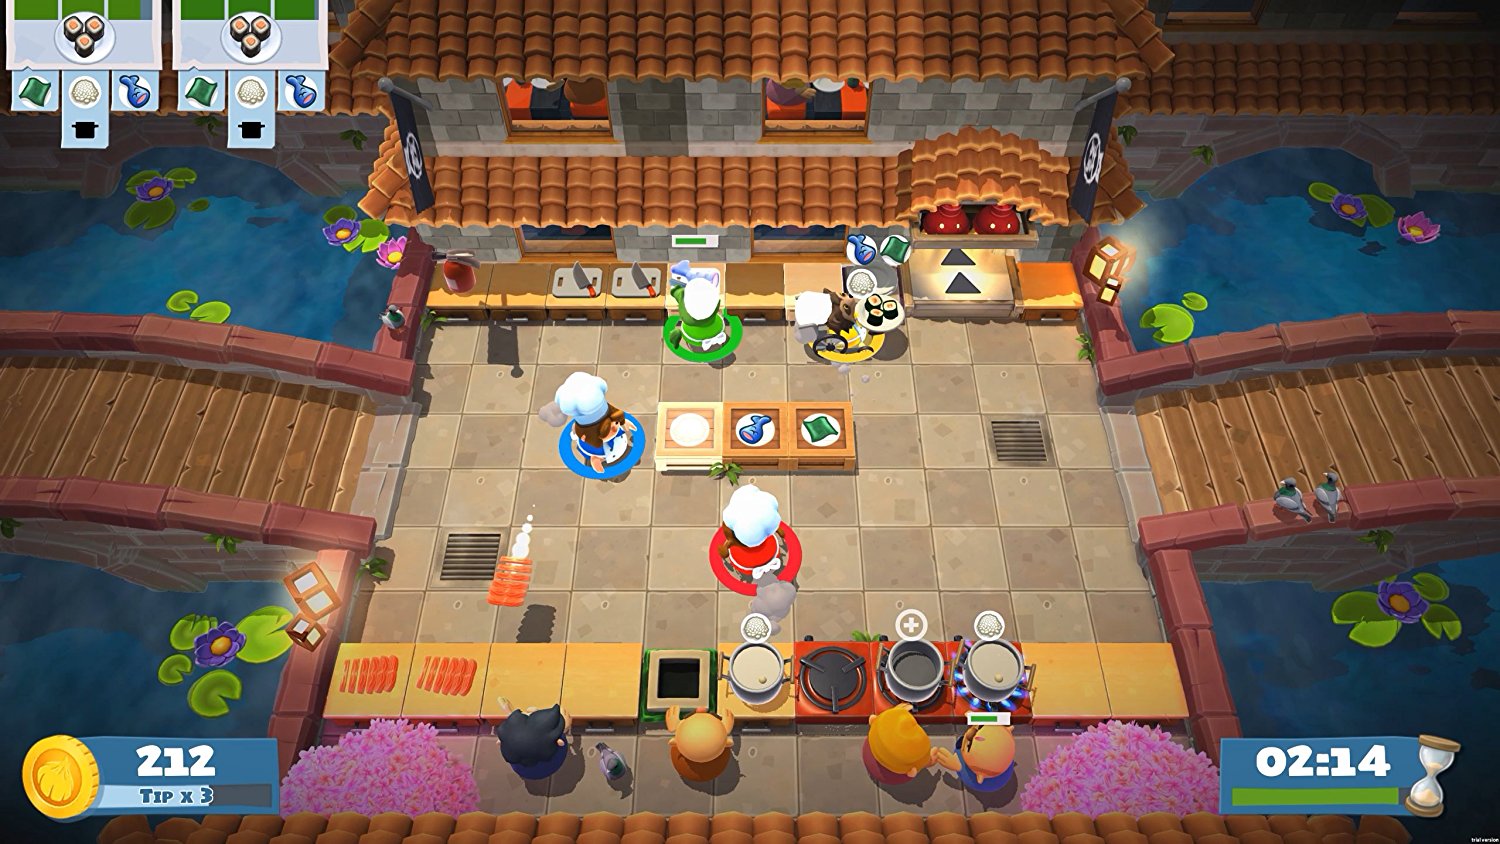 Overcooked Fails to capture the joy of food 2